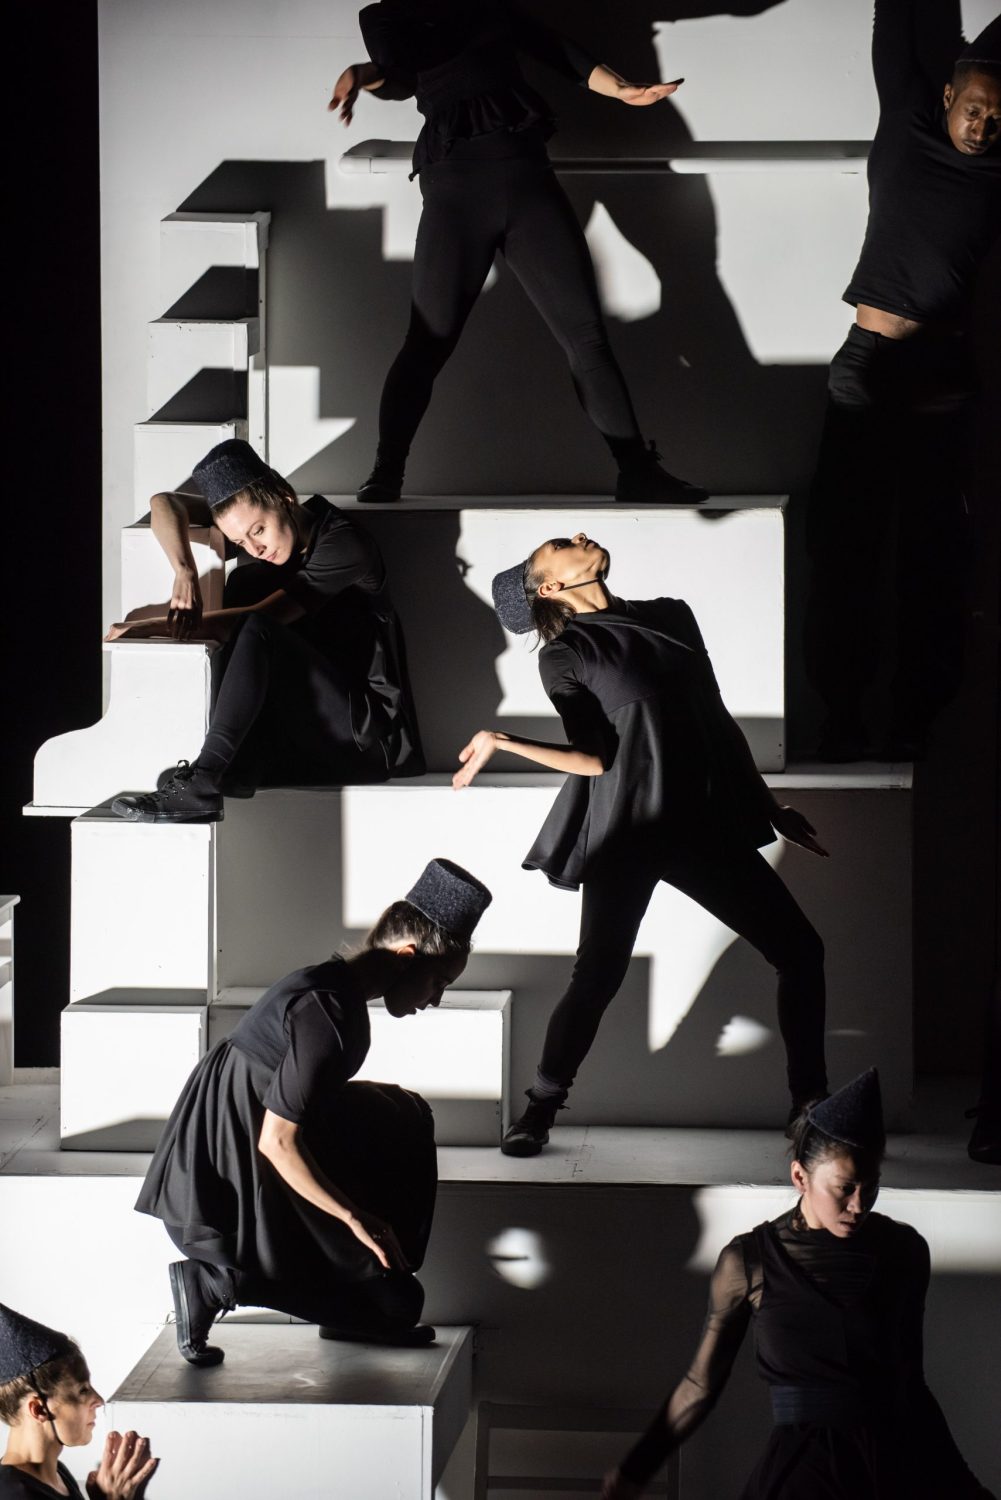 This image displays 7 performers on a white staircase structure identically dressed in black wearing top hats. They are all at different levels and positions.